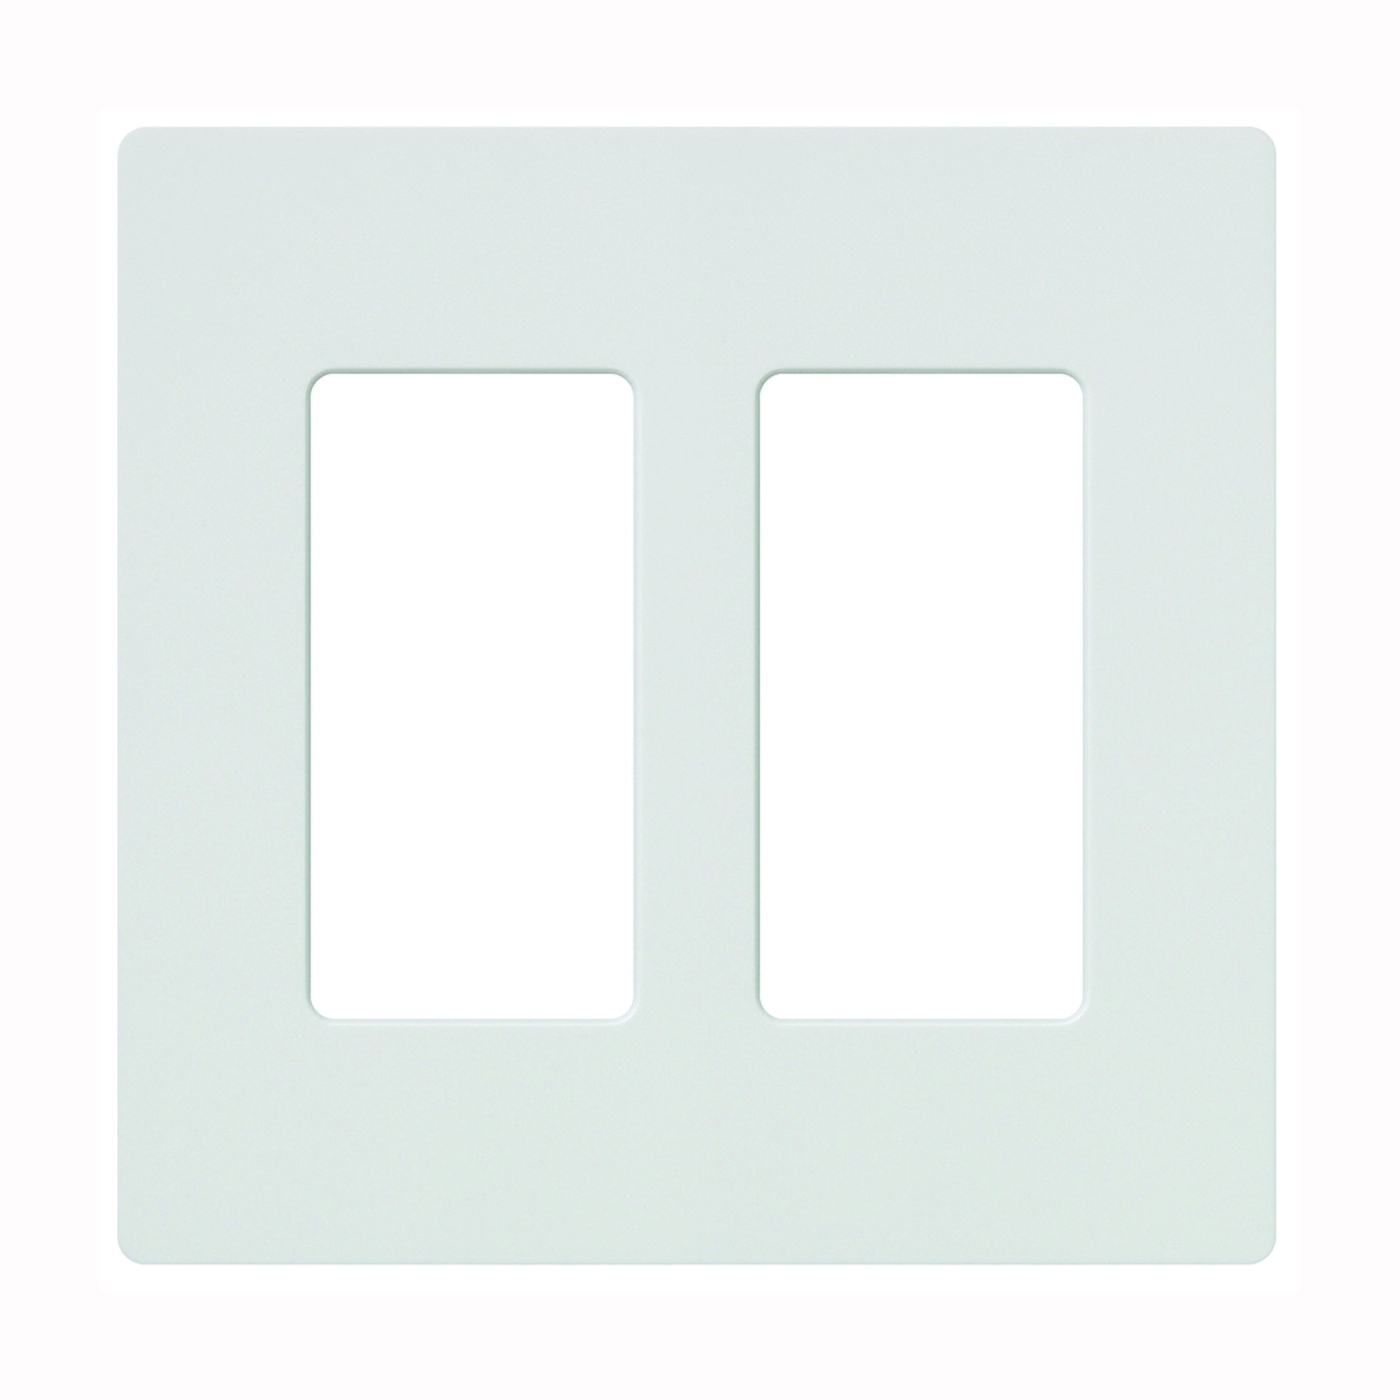 CW-2-WH Wallplate, 4.69 in L, 4-3/4 in W, 2 -Gang, Plastic, White, Gloss